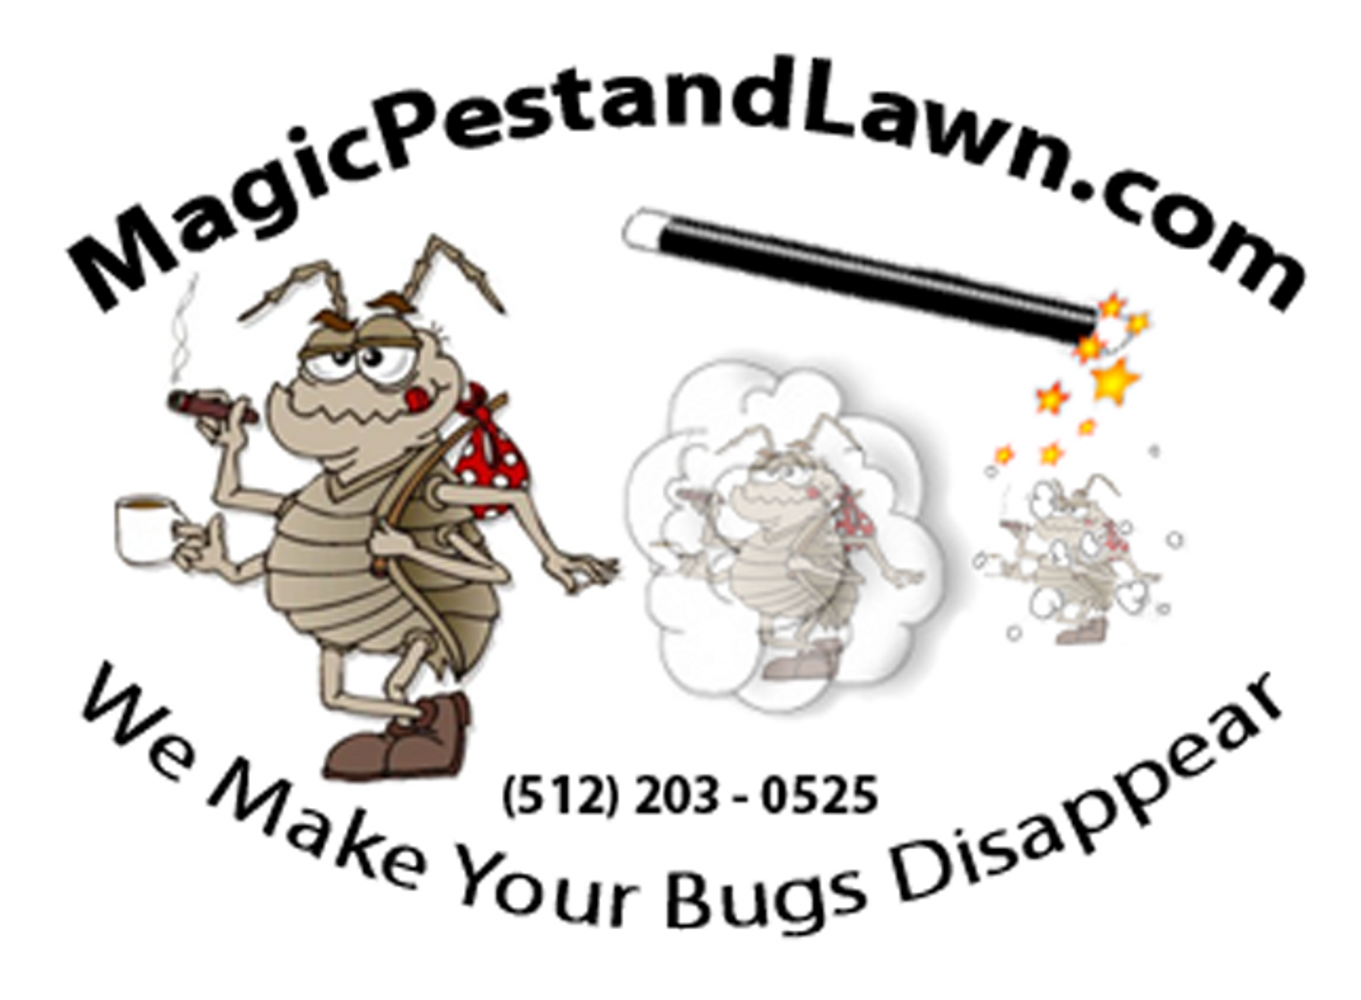 Magic Pest and Lawn Project